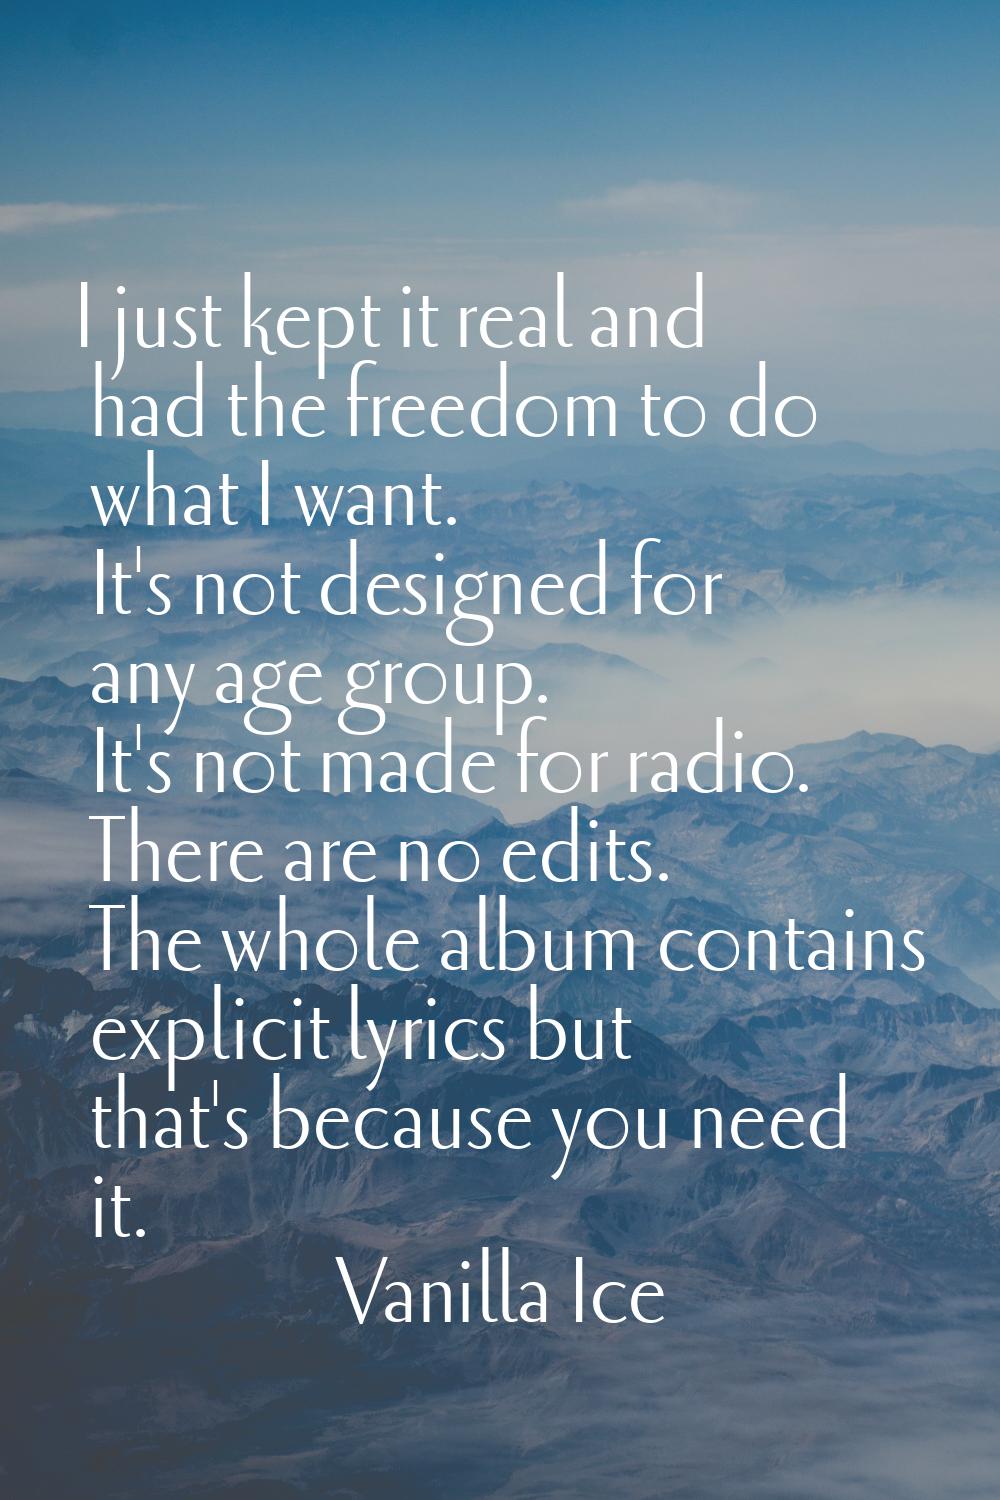 I just kept it real and had the freedom to do what I want. It's not designed for any age group. It'